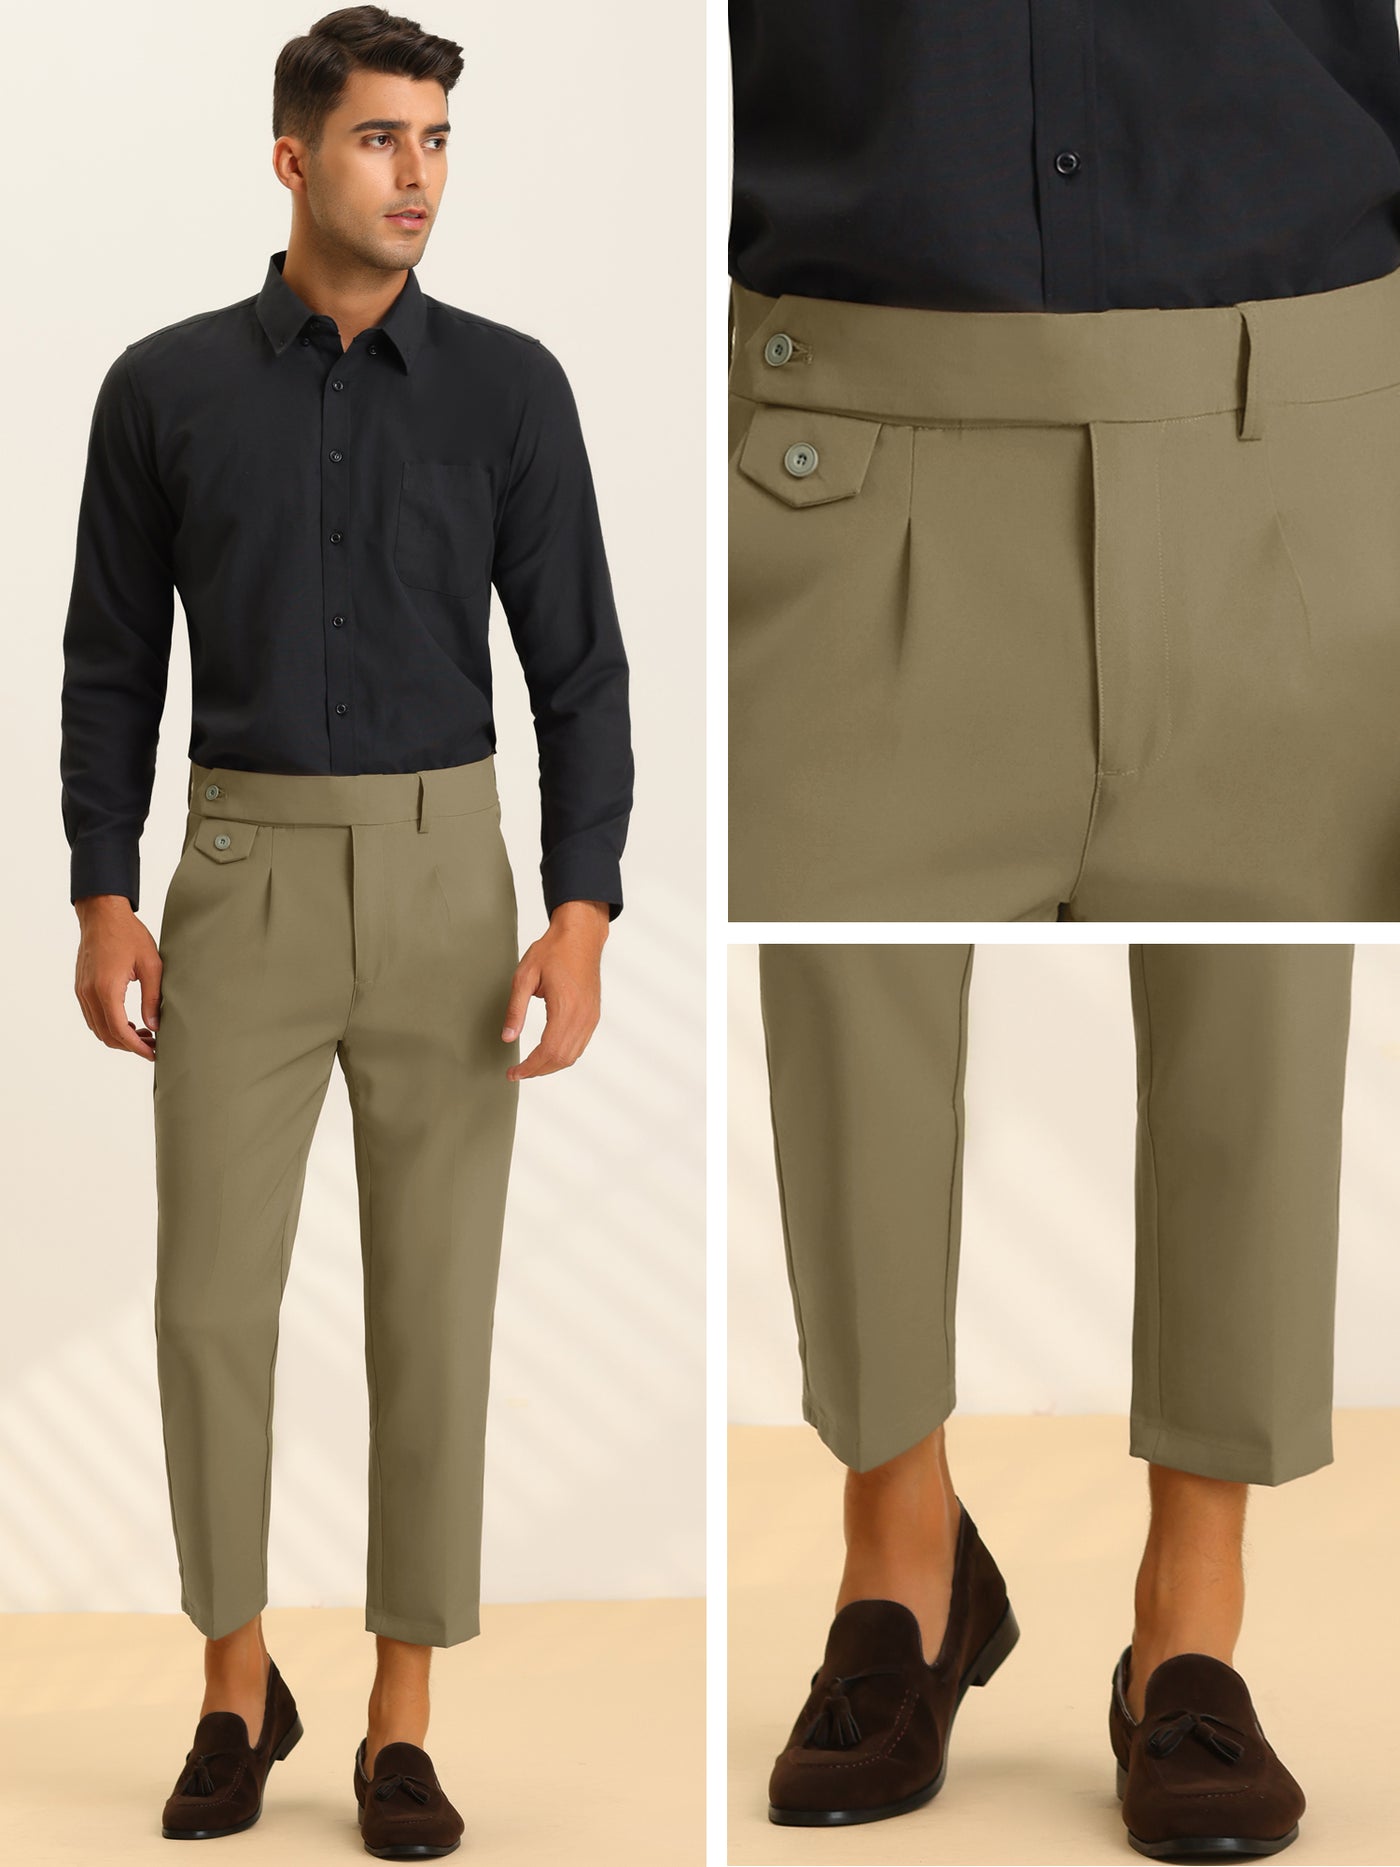 Bublédon Men's Pleated Front Solid Business Tapered Cropped Dress Pants